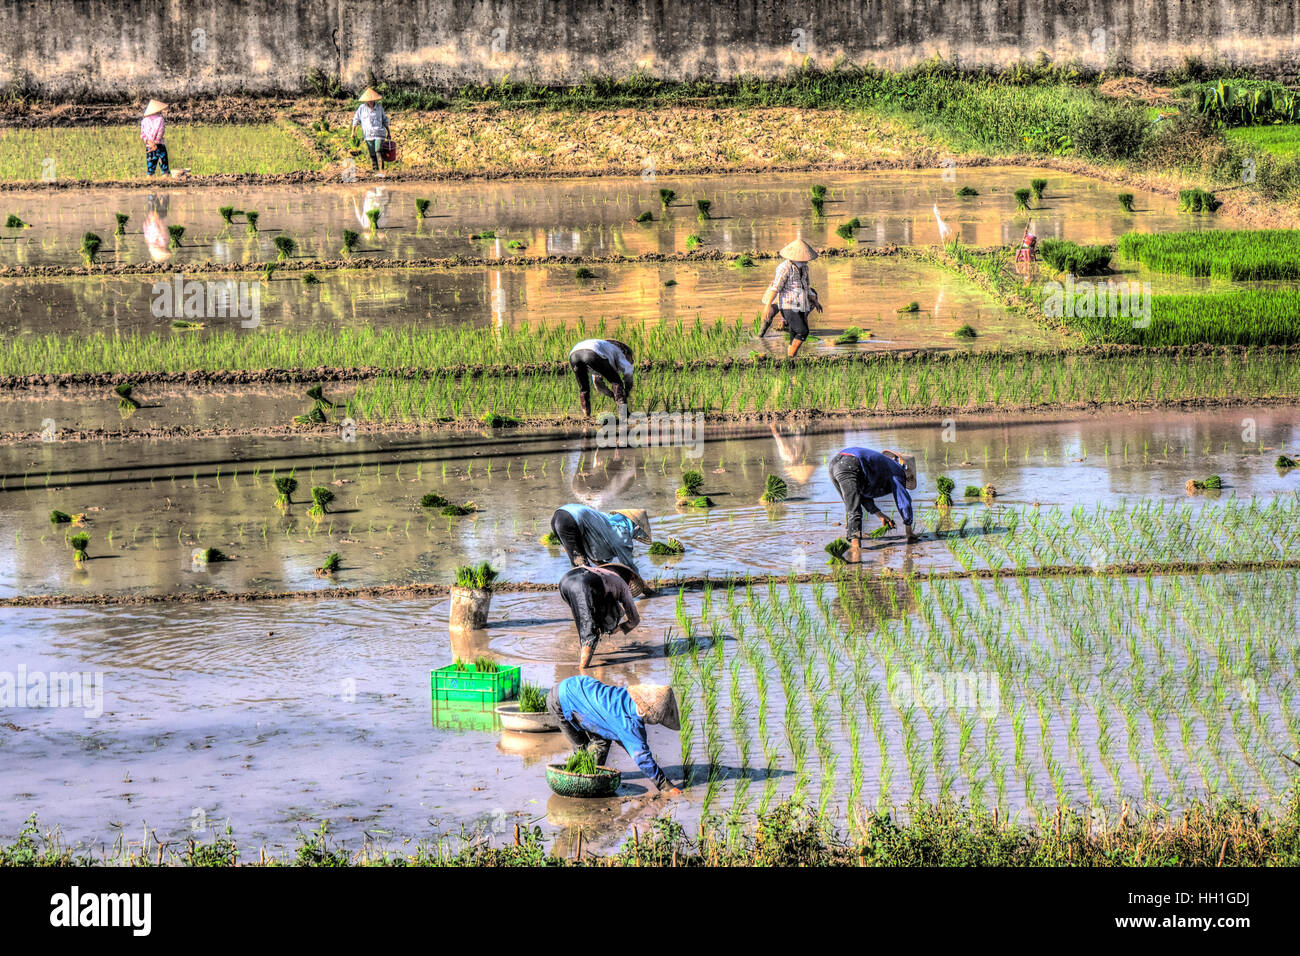 Vietnamese rice farmworkers planting rice in a paddy field.  This photo was taken on the way to Halong Bay, Hanoi. Stock Photo